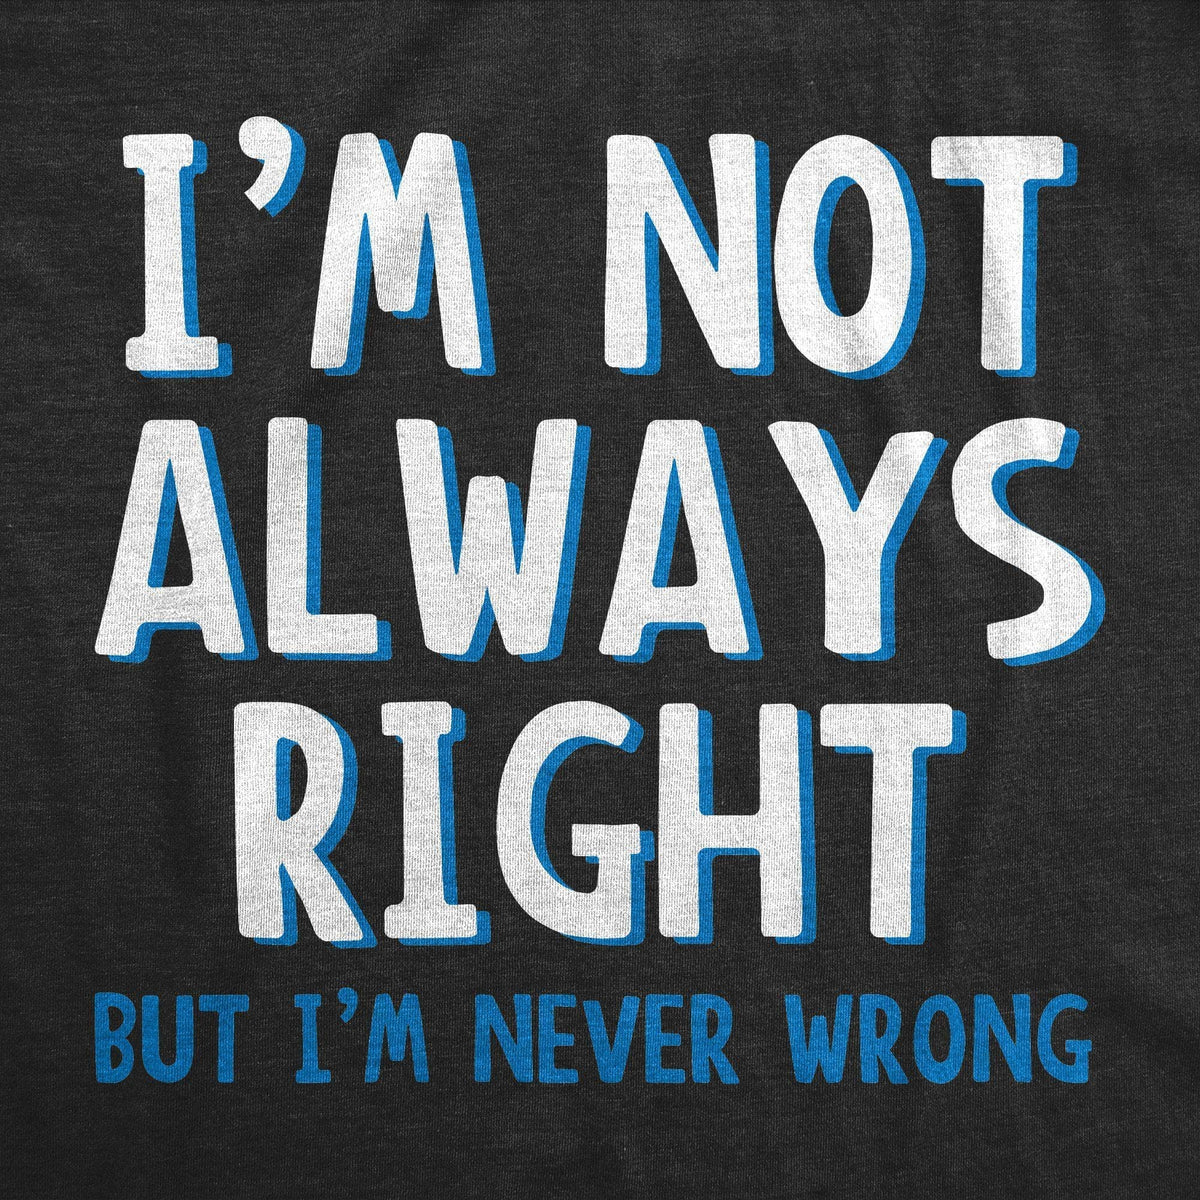 I&#39;m Not Always Right But I&#39;m Never Wrong Men&#39;s Tshirt  -  Crazy Dog T-Shirts